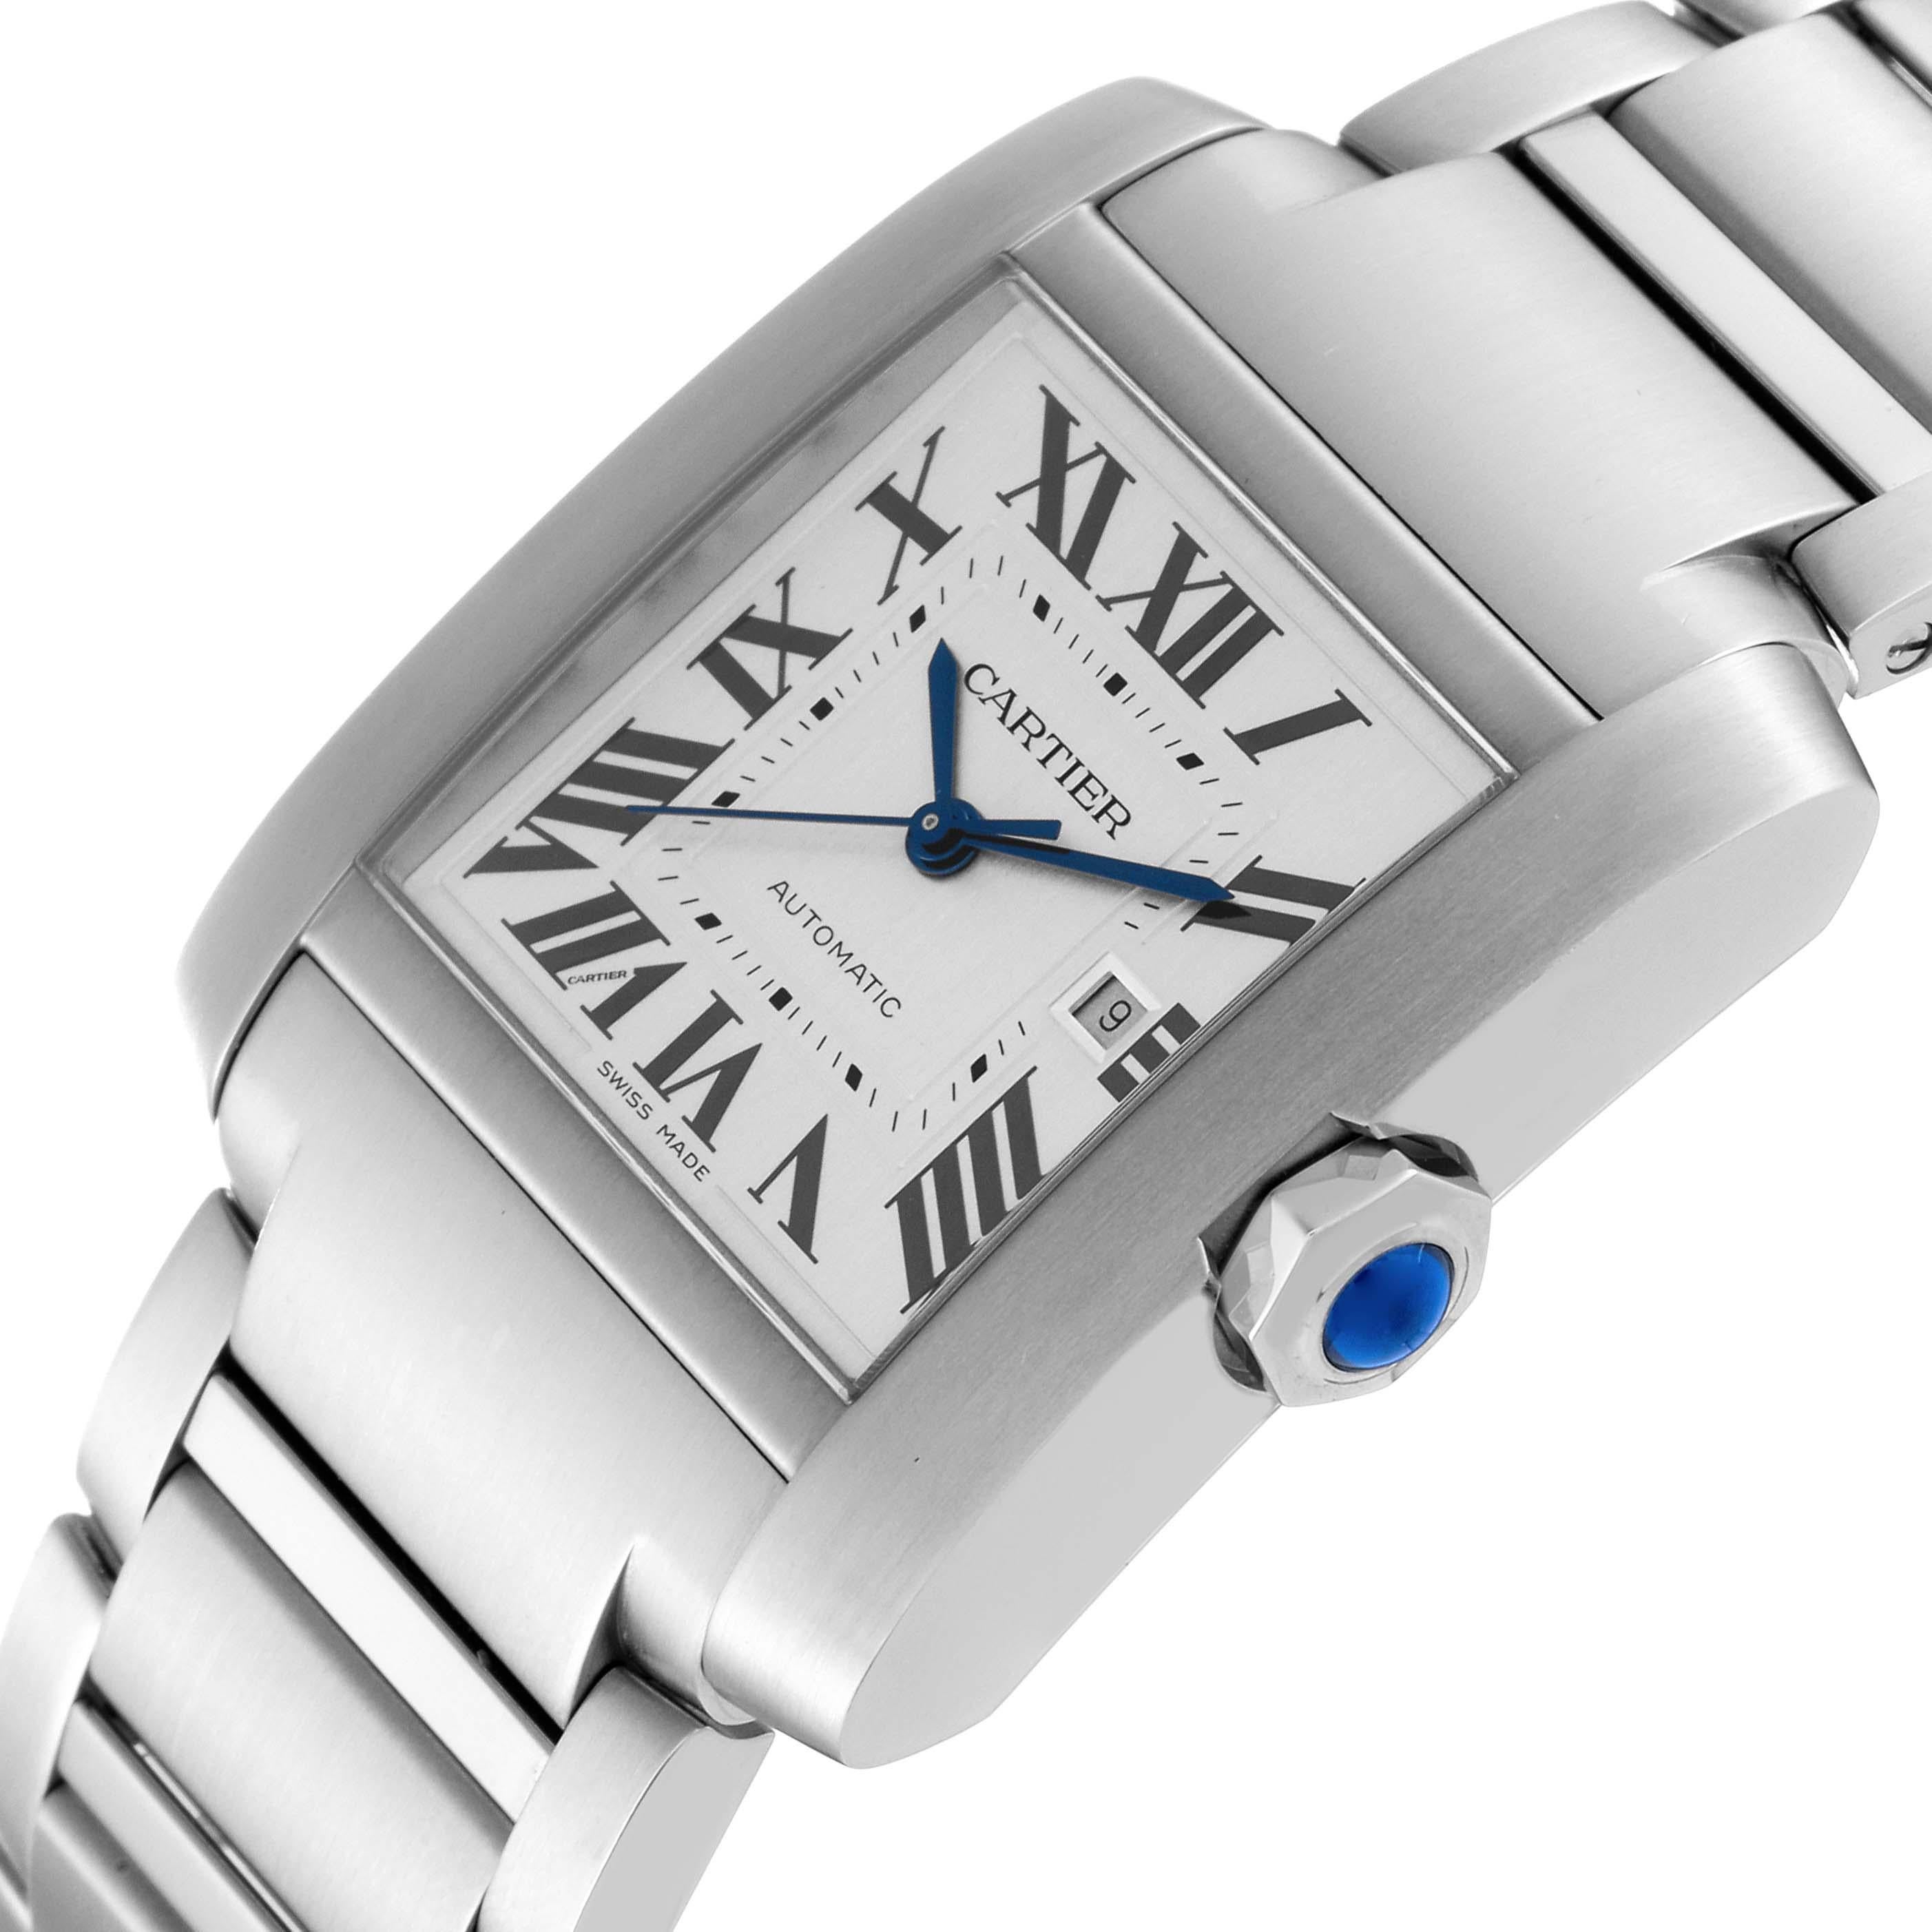 Cartier Tank Francaise Large Automatic Steel Mens Watch WSTA0067. Automatic self-winding movement. Rectangular stainless steel 36.7 x 30.5 mm case. Octagonal crown set with a blue spinel cabochon. . Scratch resistant sapphire crystal. Silvered dial